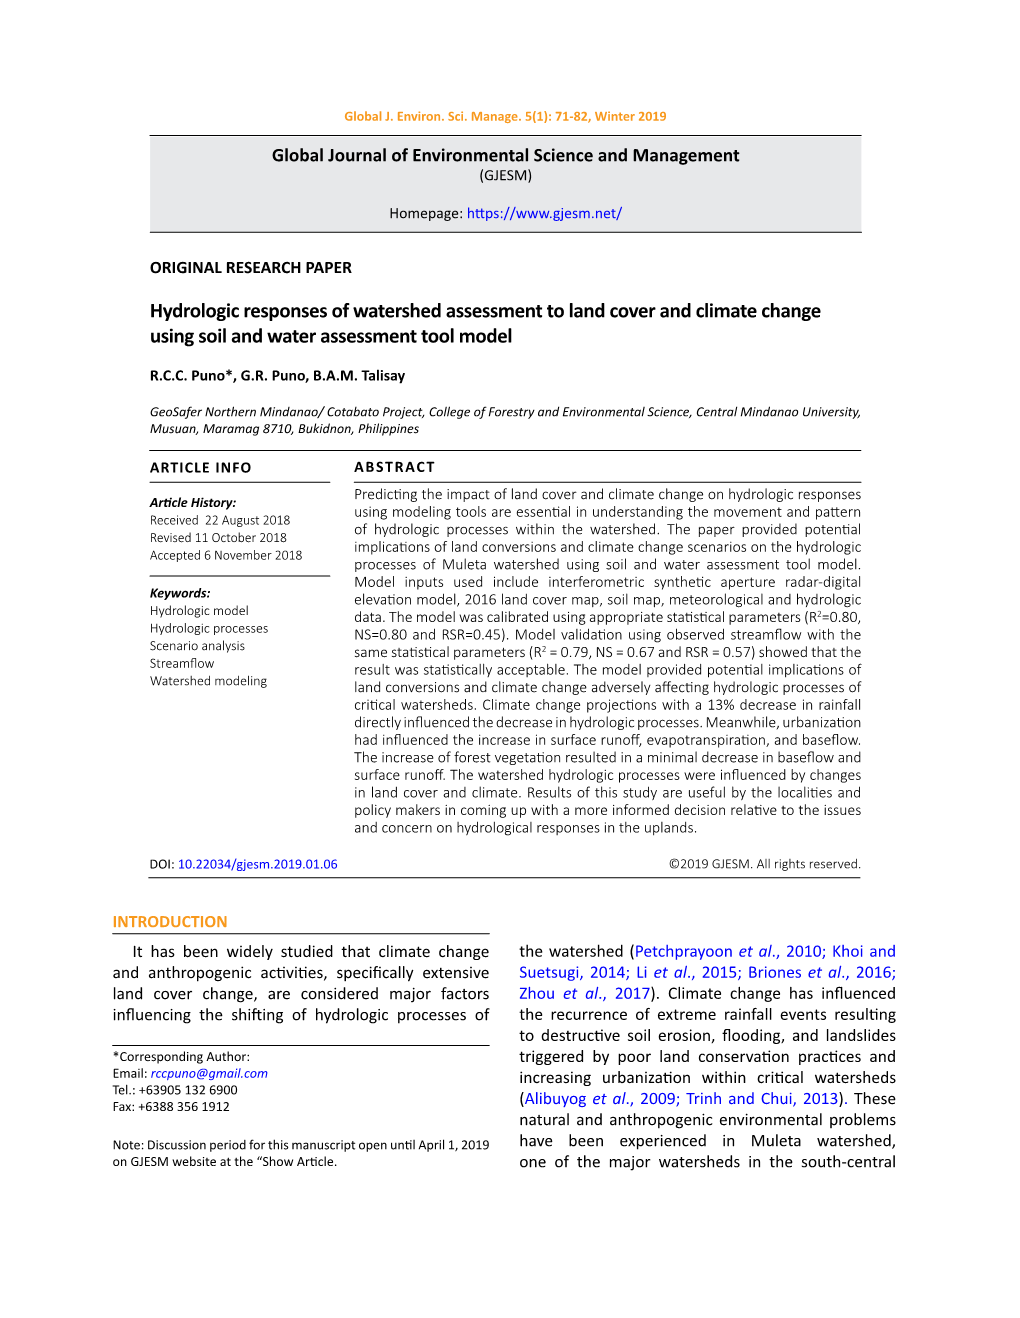 Hydrologic Responses of Watershed to Land Cover and Climate Change Using Soil and Water Assessment Tool Model